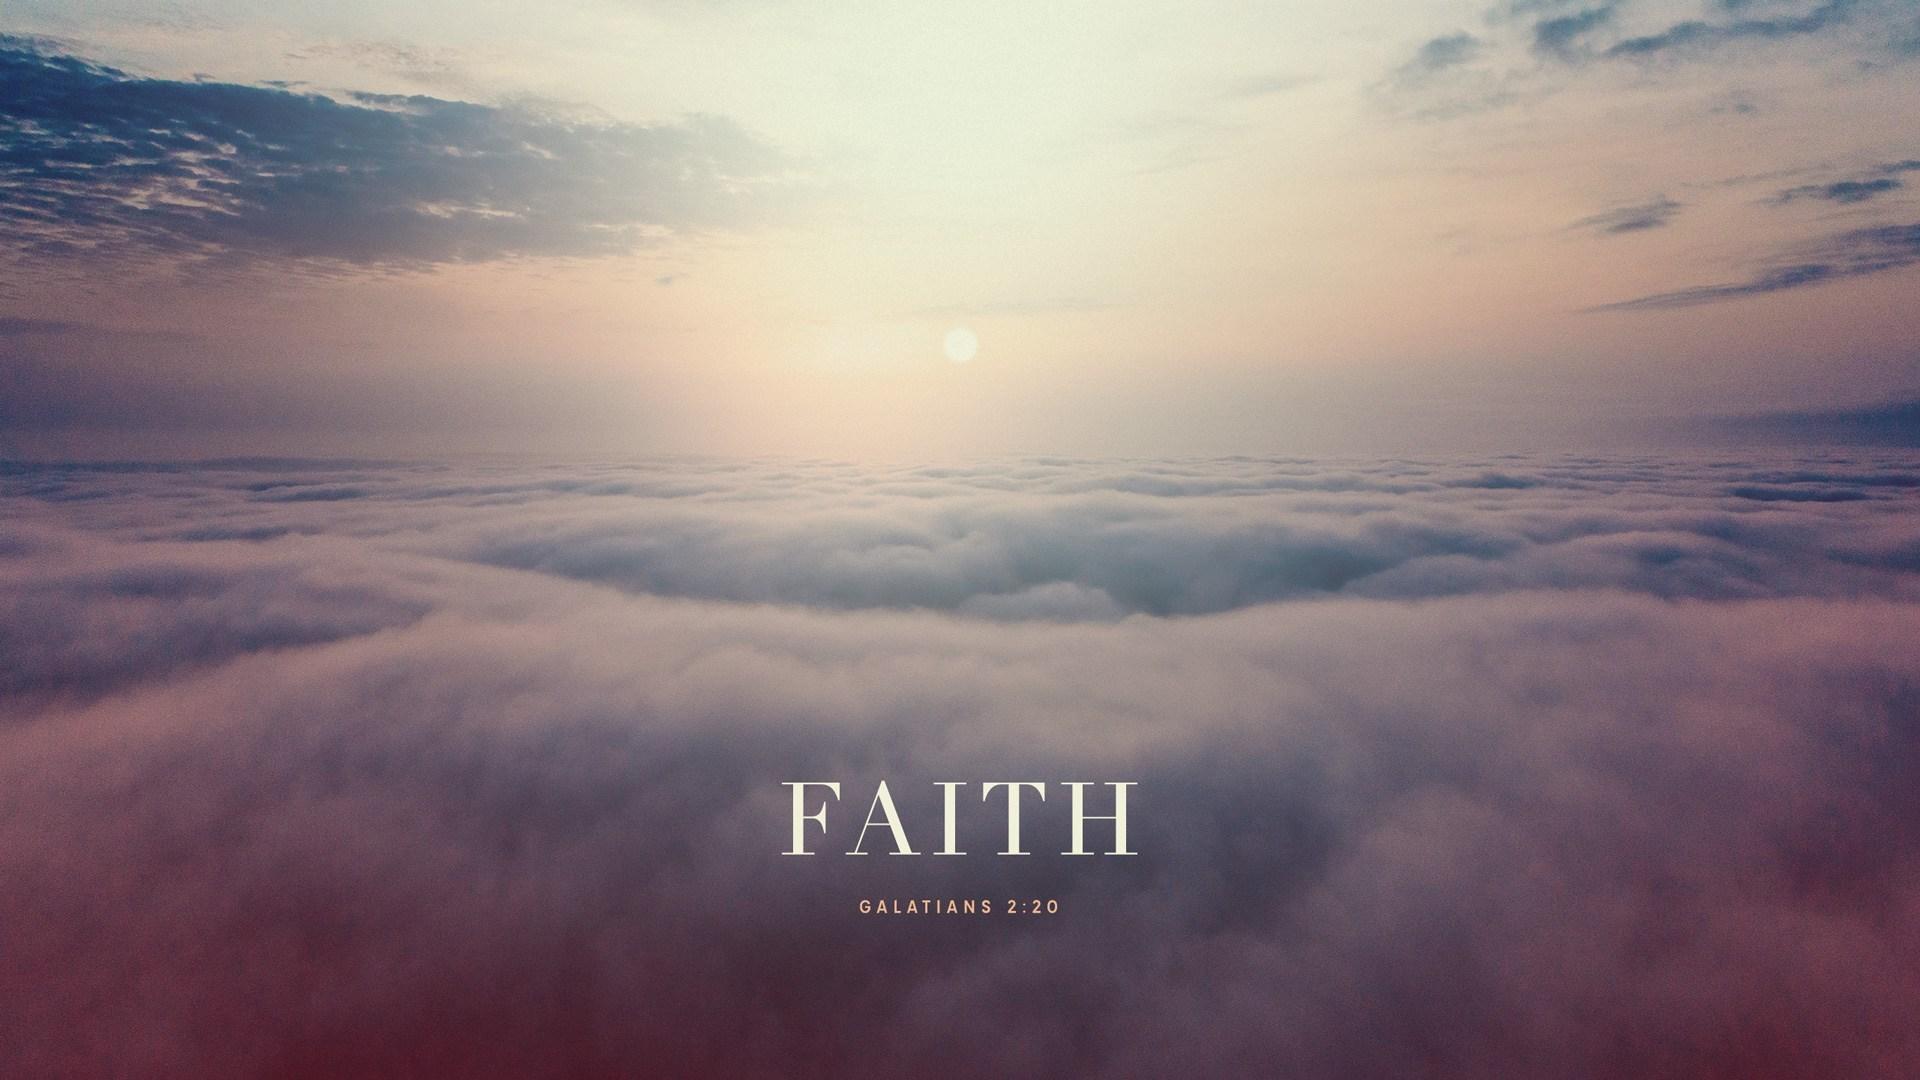 100+] Faith In God Wallpapers | Wallpapers.com